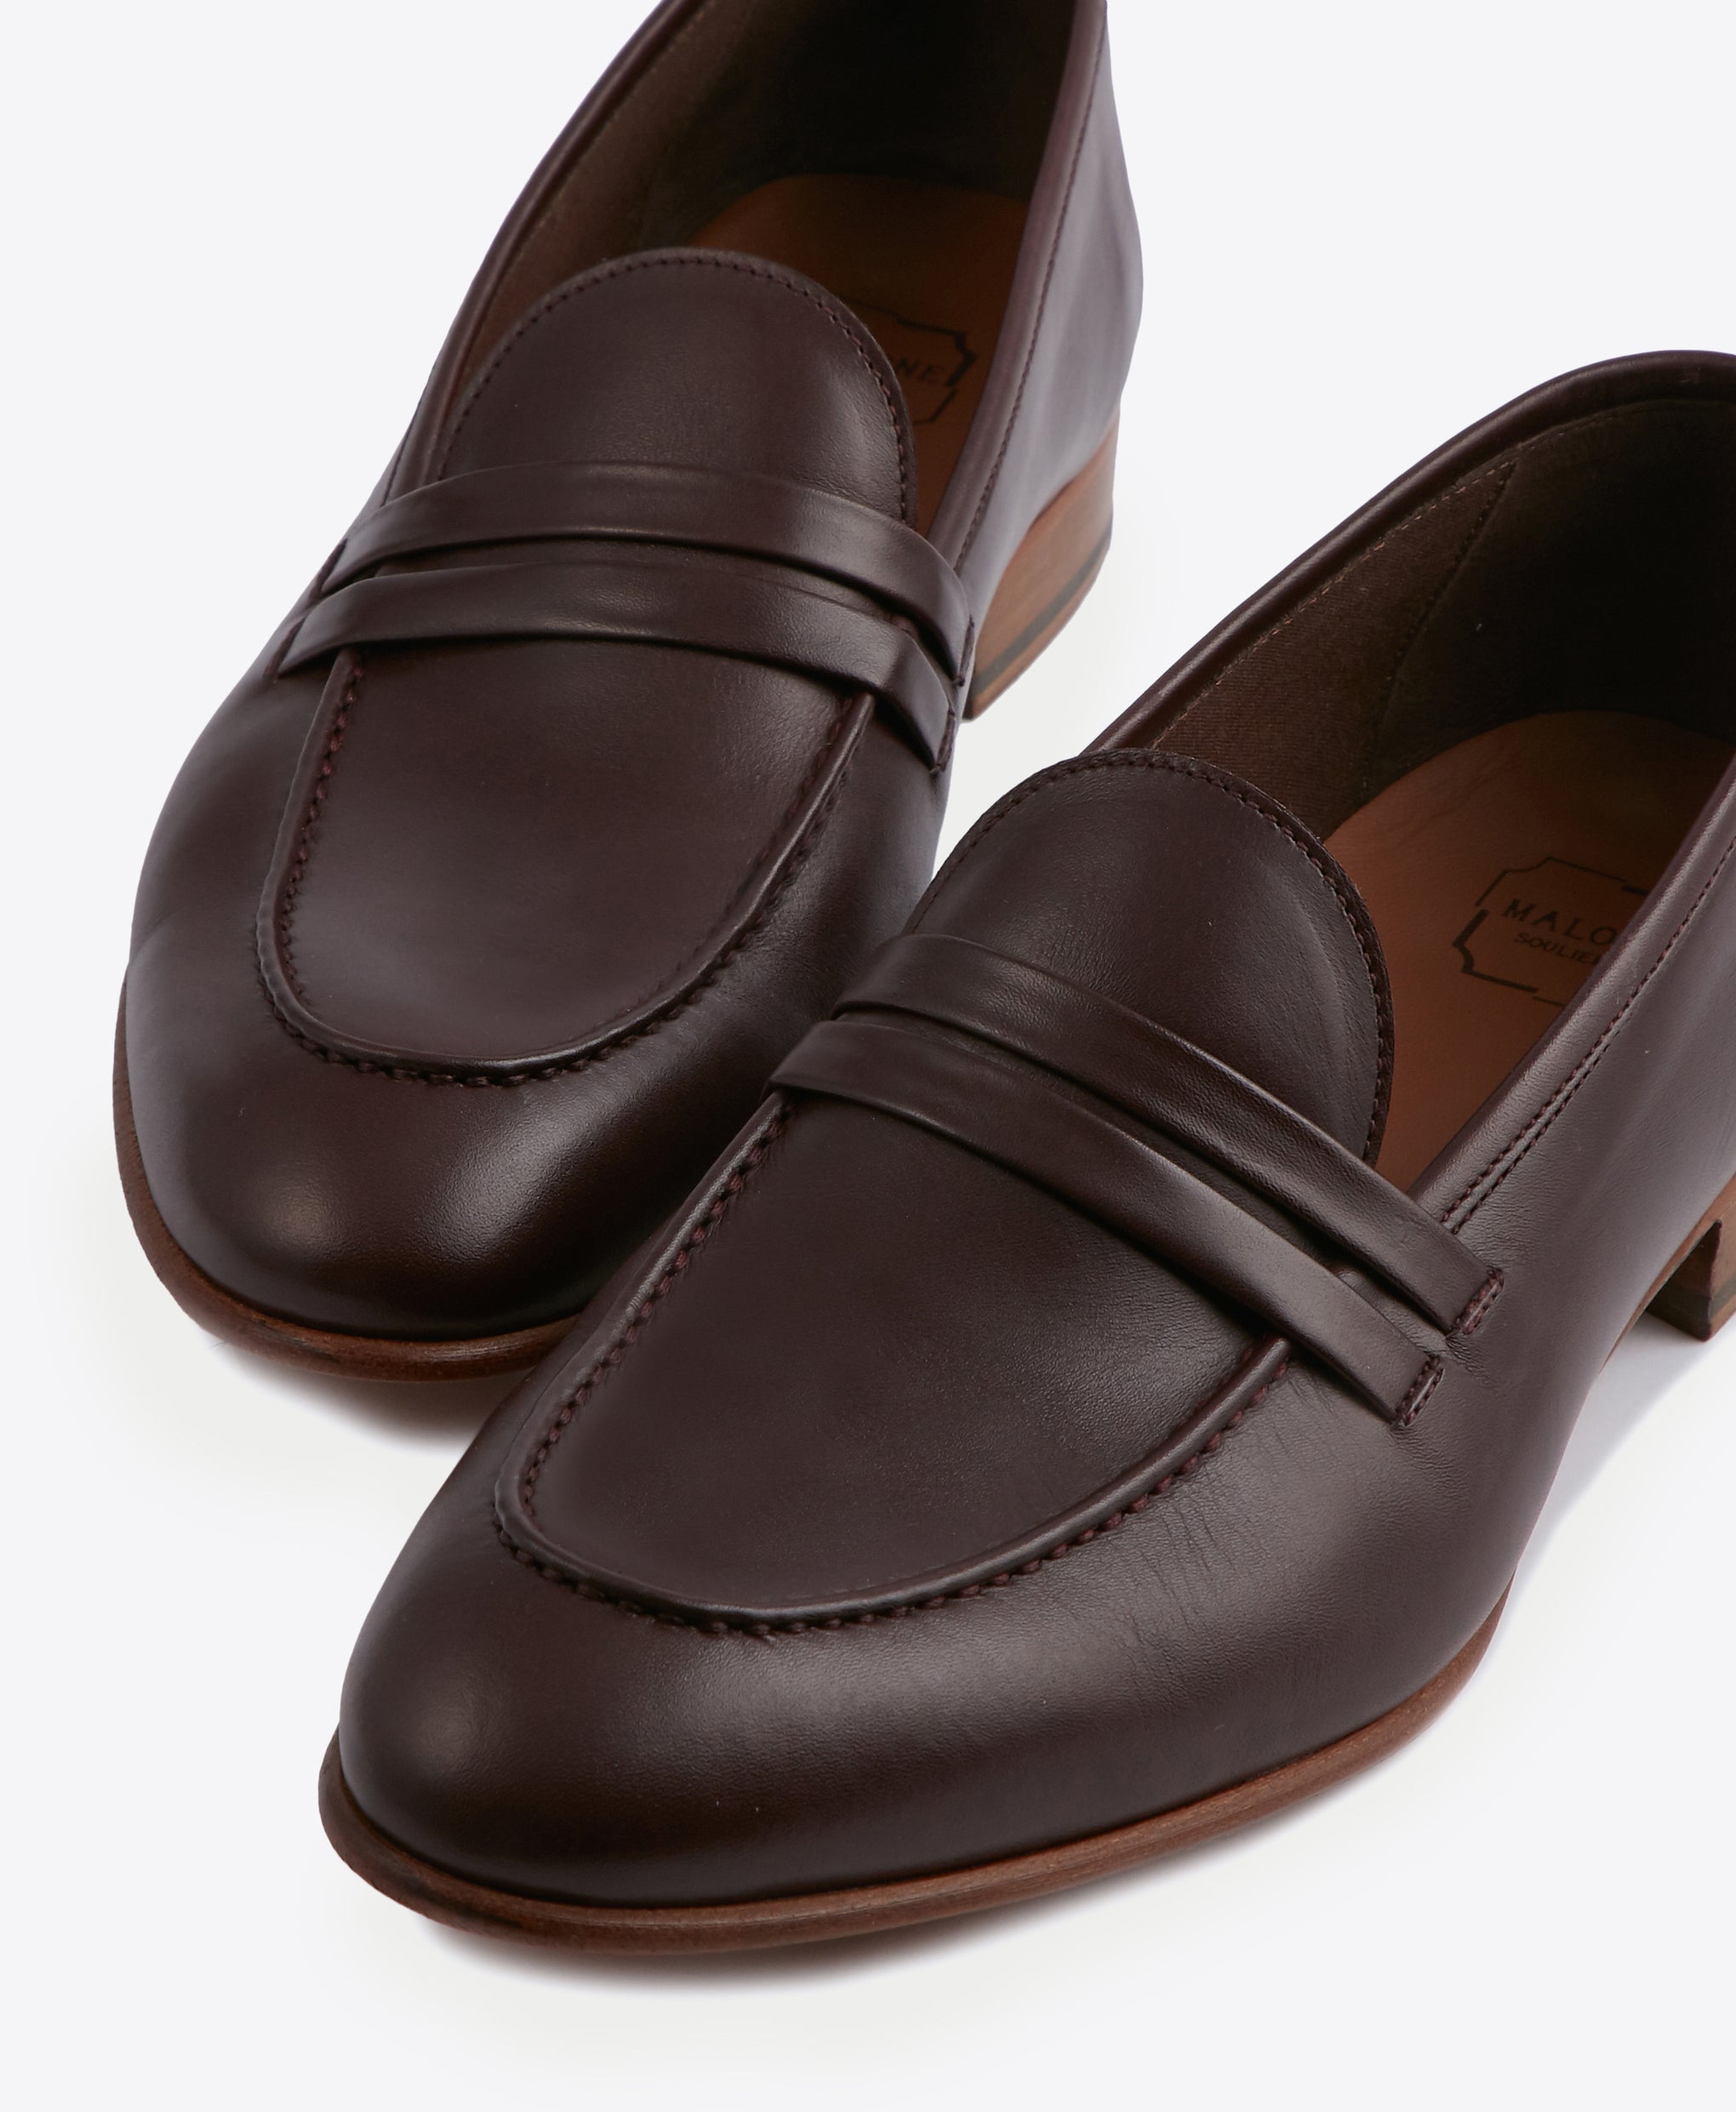 Men's Brown Leather Flat Loafers Malone Souliers